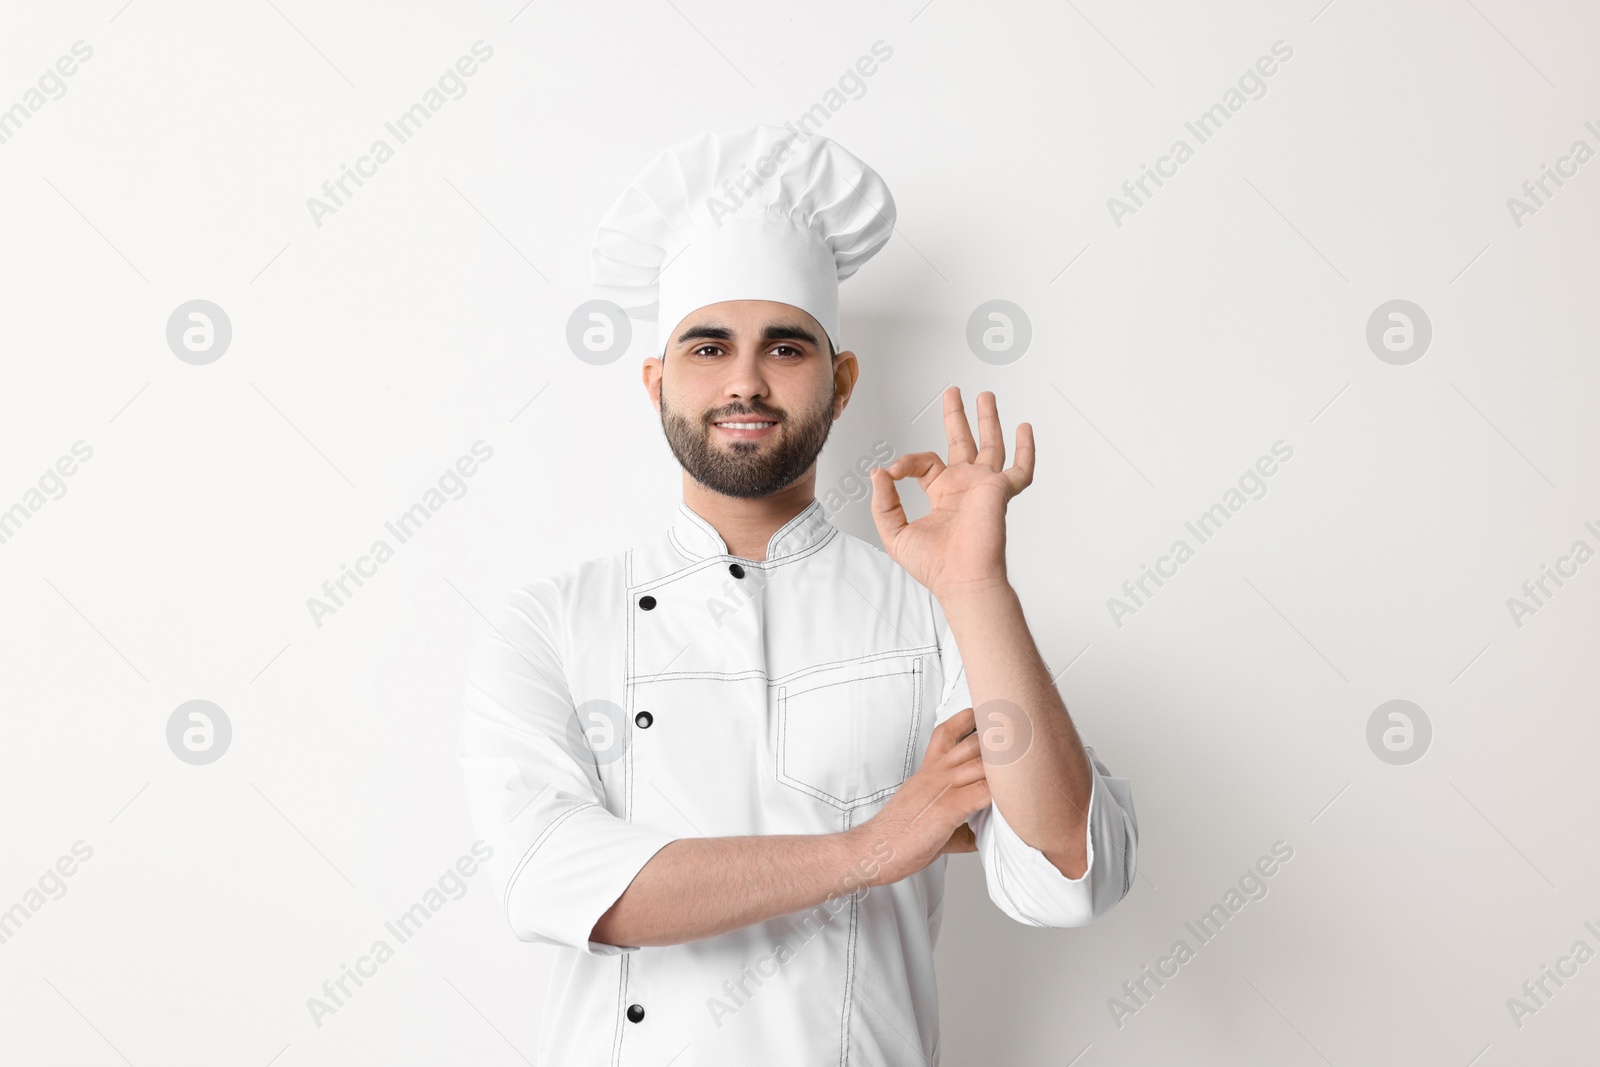 Photo of Professional chef with showing OK gesture on white background